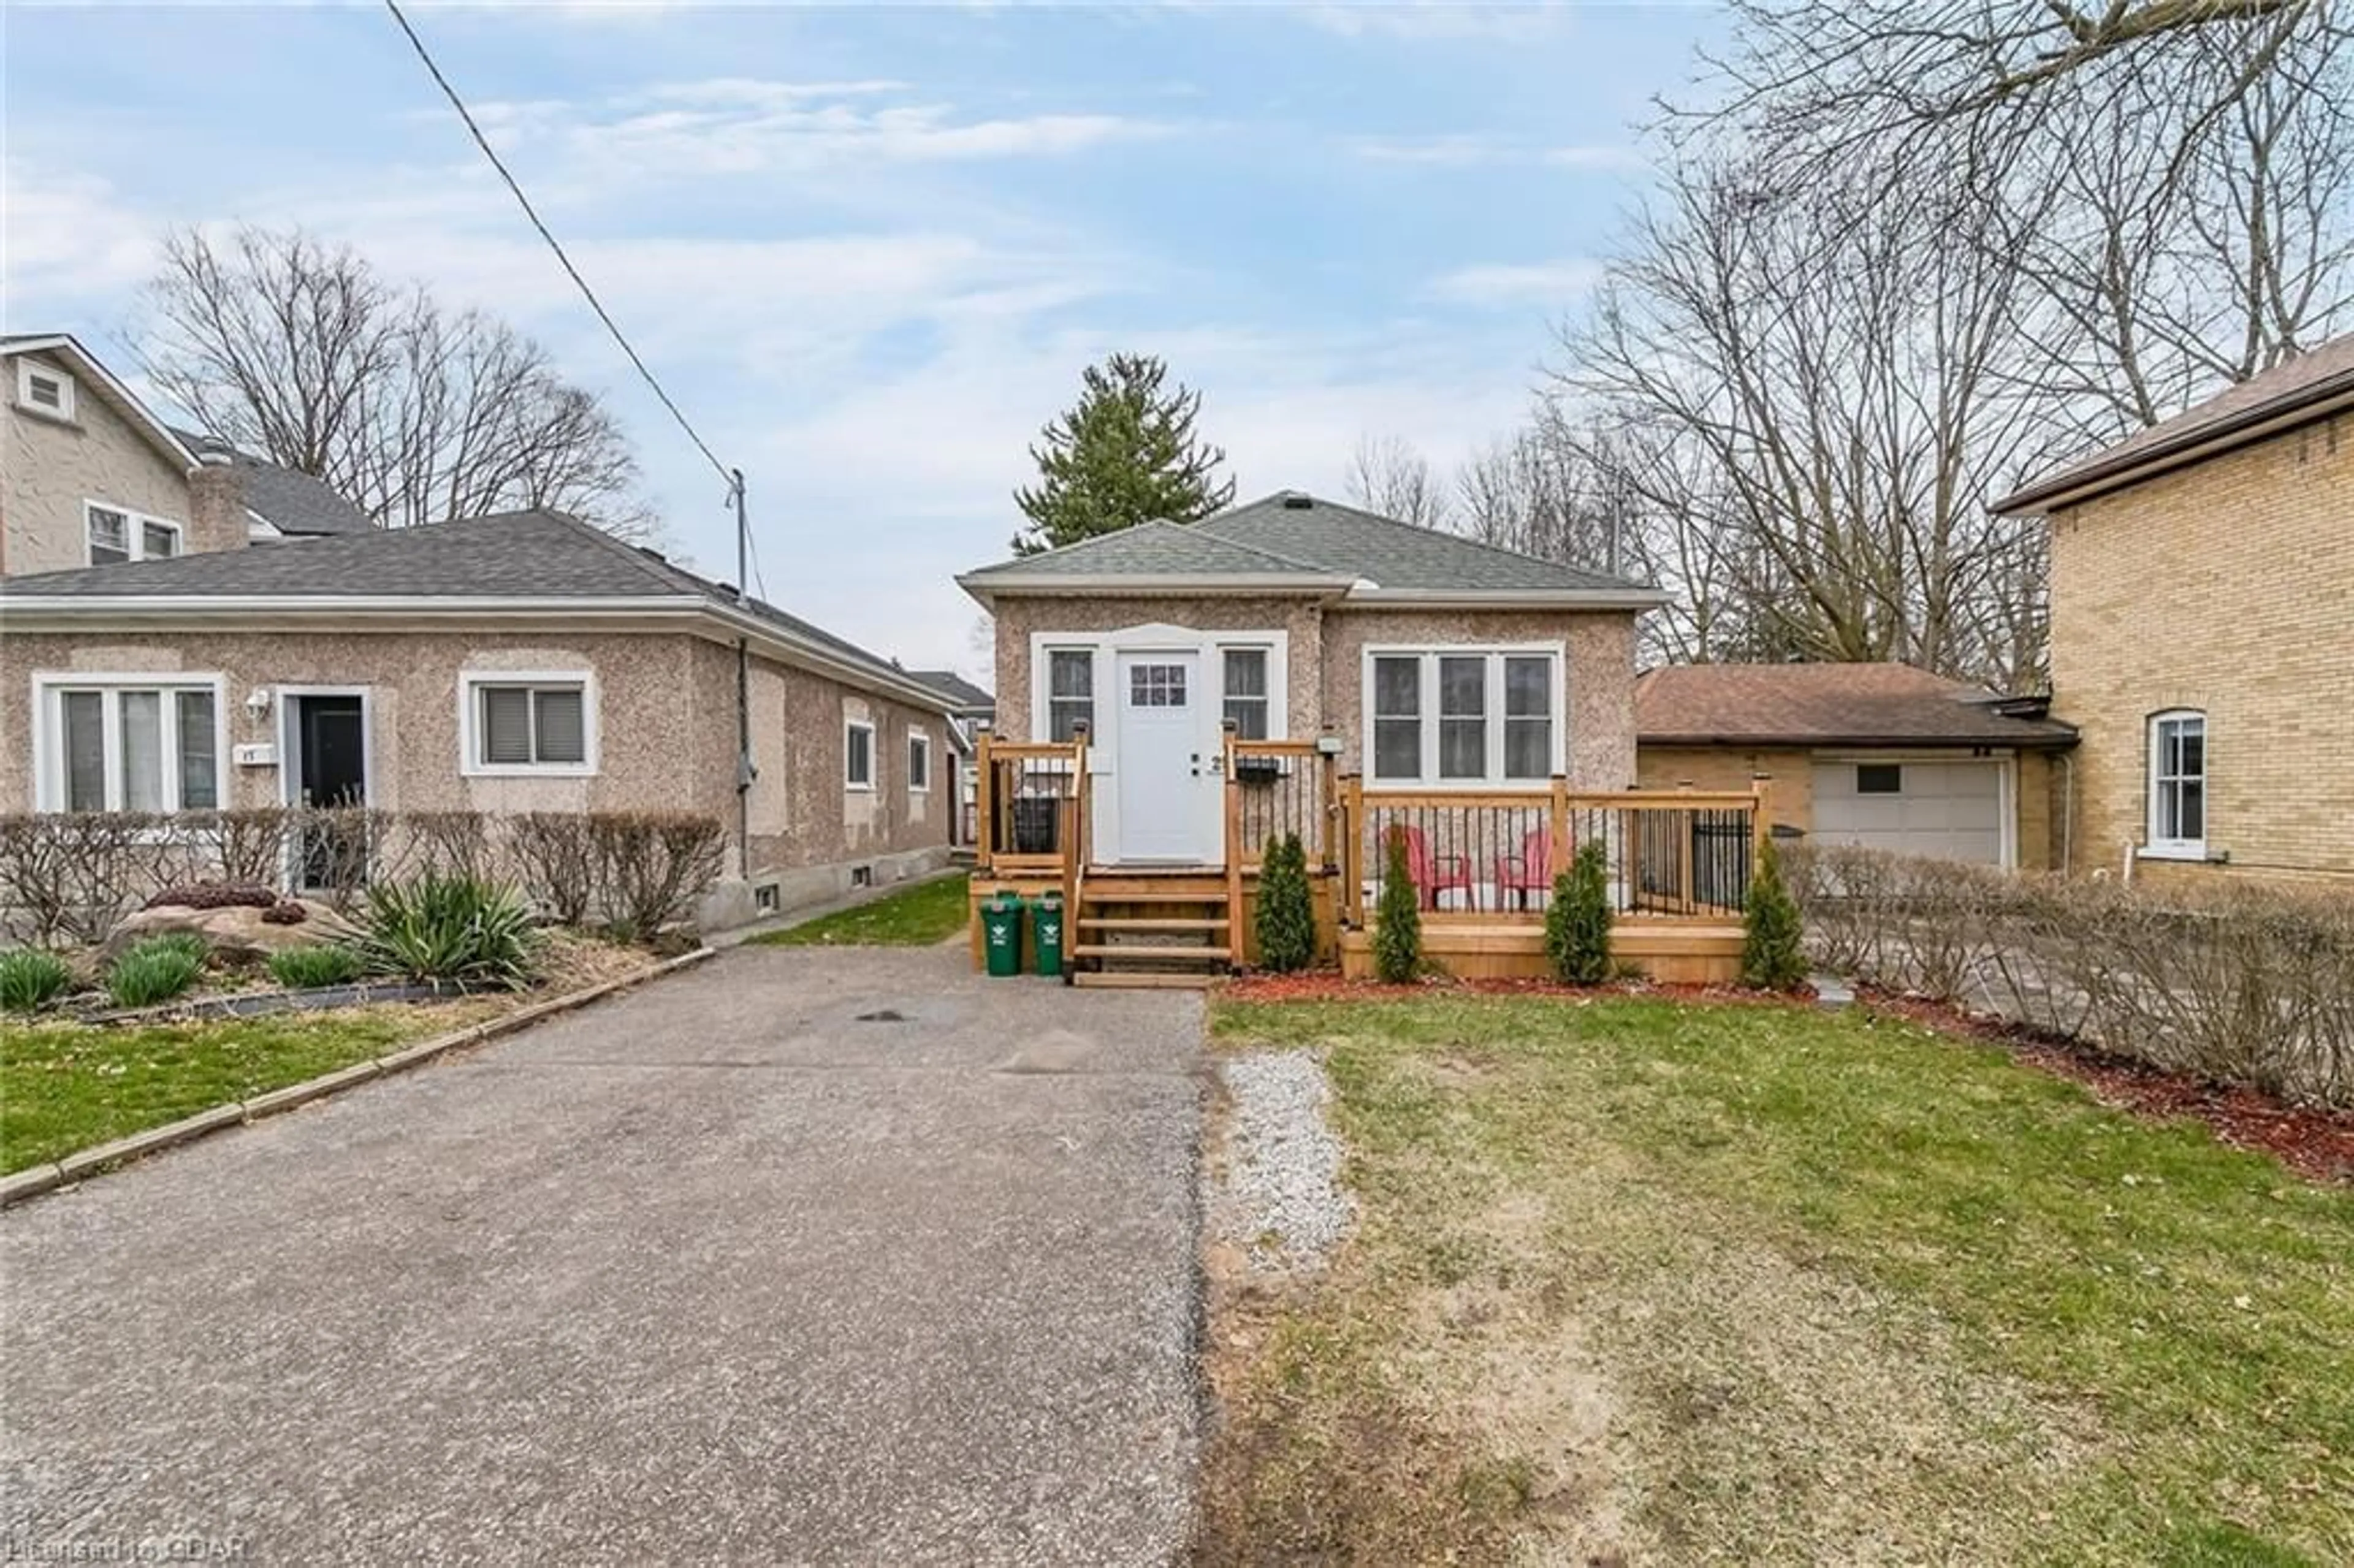 Frontside or backside of a home for 25 Cameron St, Cambridge Ontario N1R 4G9